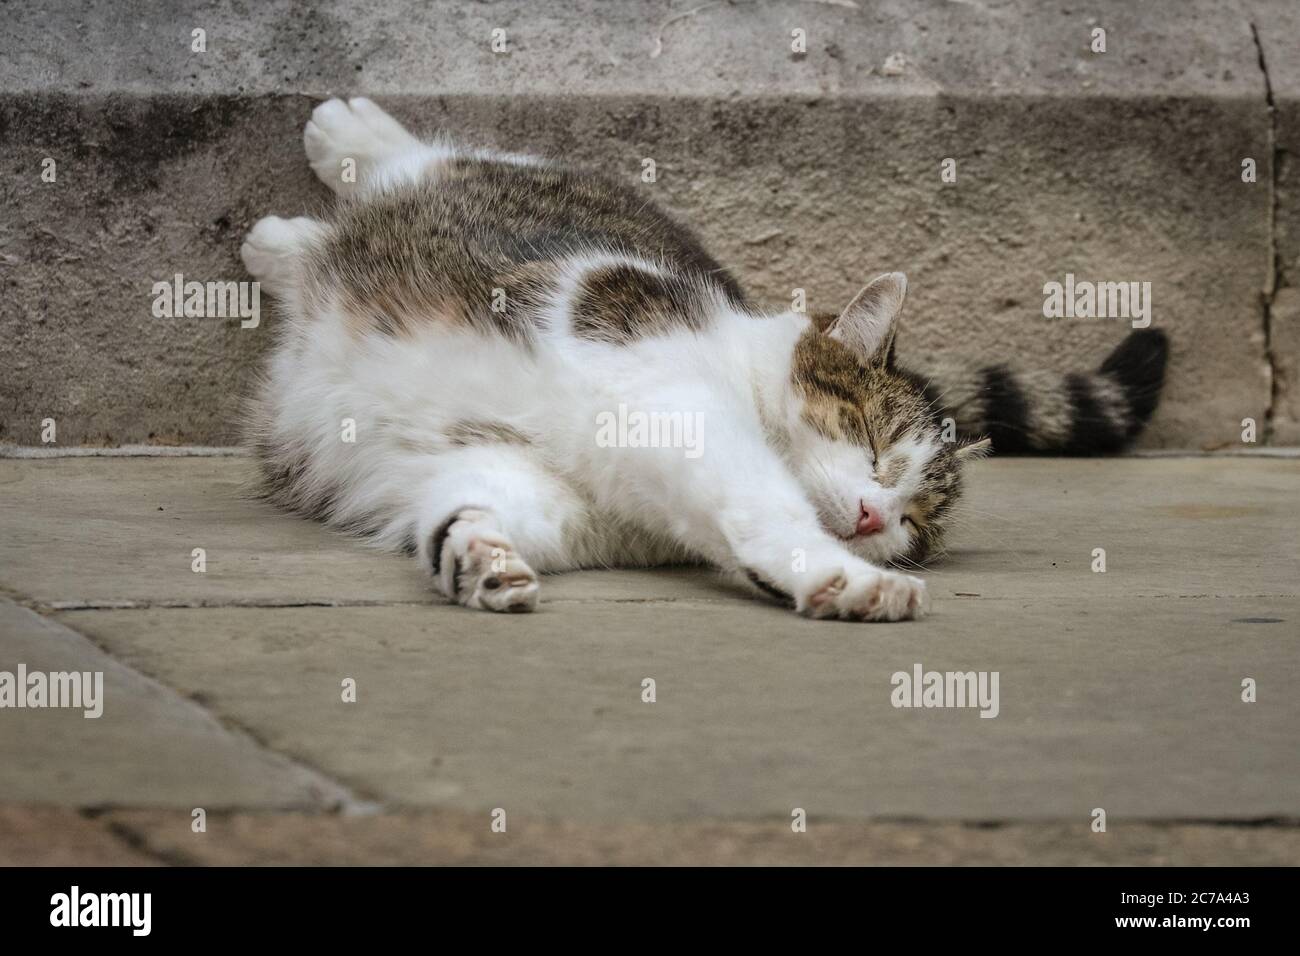 Downing Street, London, UK. 15th July, 2020. Larry, the resident Downing Street cat and Chief Mouser, clearly enjoys himself as he stretches and rolls around on the pavement outside the Prime Minister's official residence for what looks like cat yoga, using the absence of the usual press crowd to take full reign of his Westminster territory. The tabby, originally adopted from Battersea Dog's and Cat's Home, is popular with visitors and enjoys a large social media following. Credit: Imageplotter/Alamy Live News Stock Photo